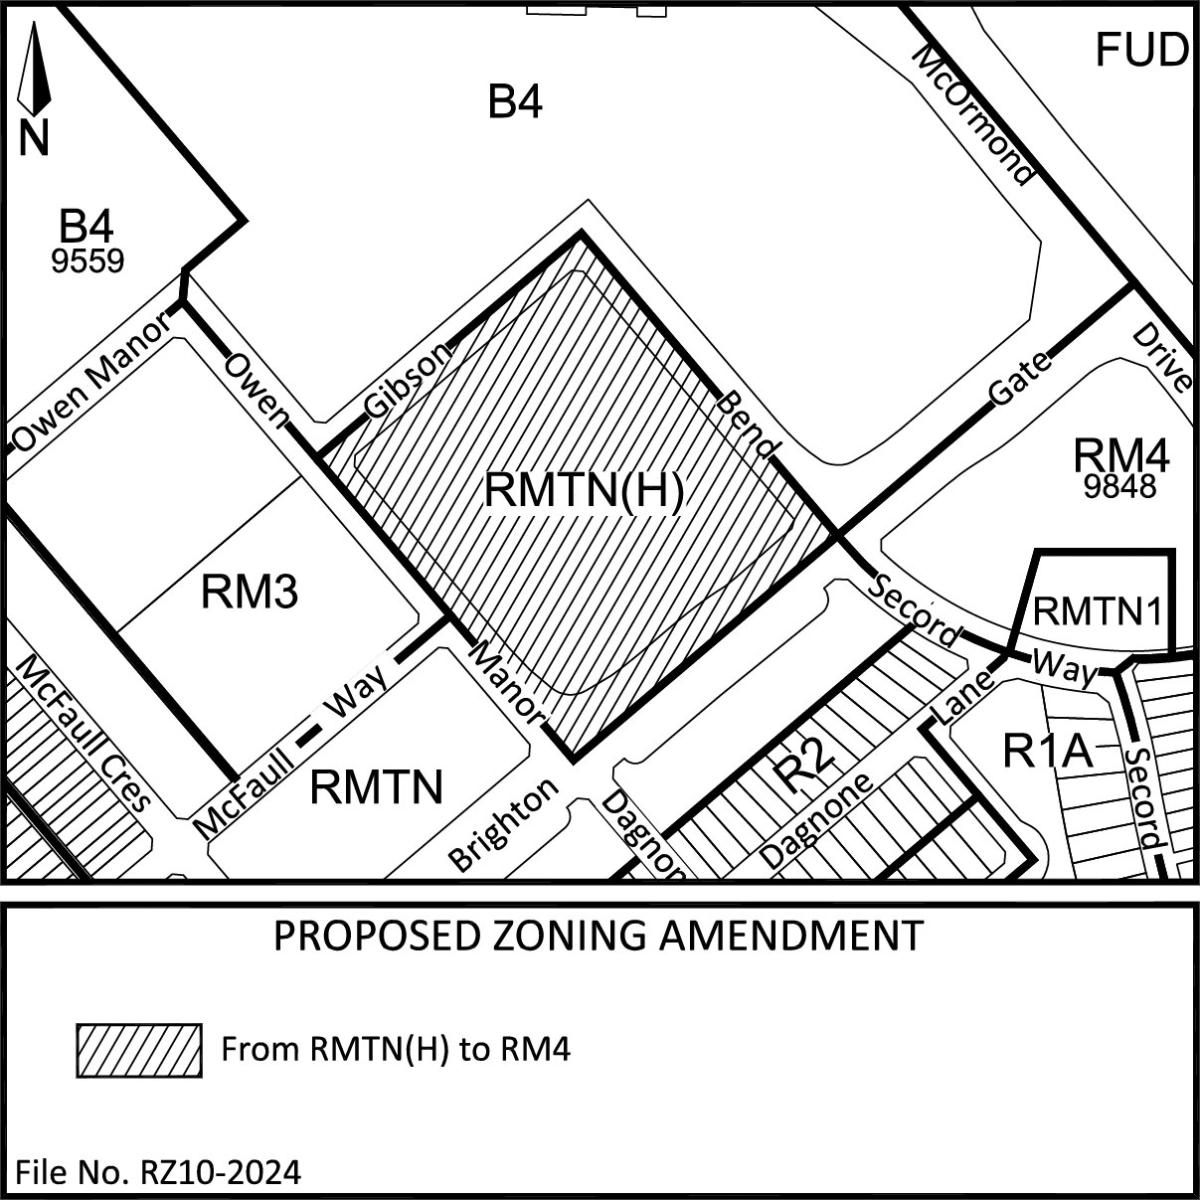 A location map showing the proposed zoning amendments